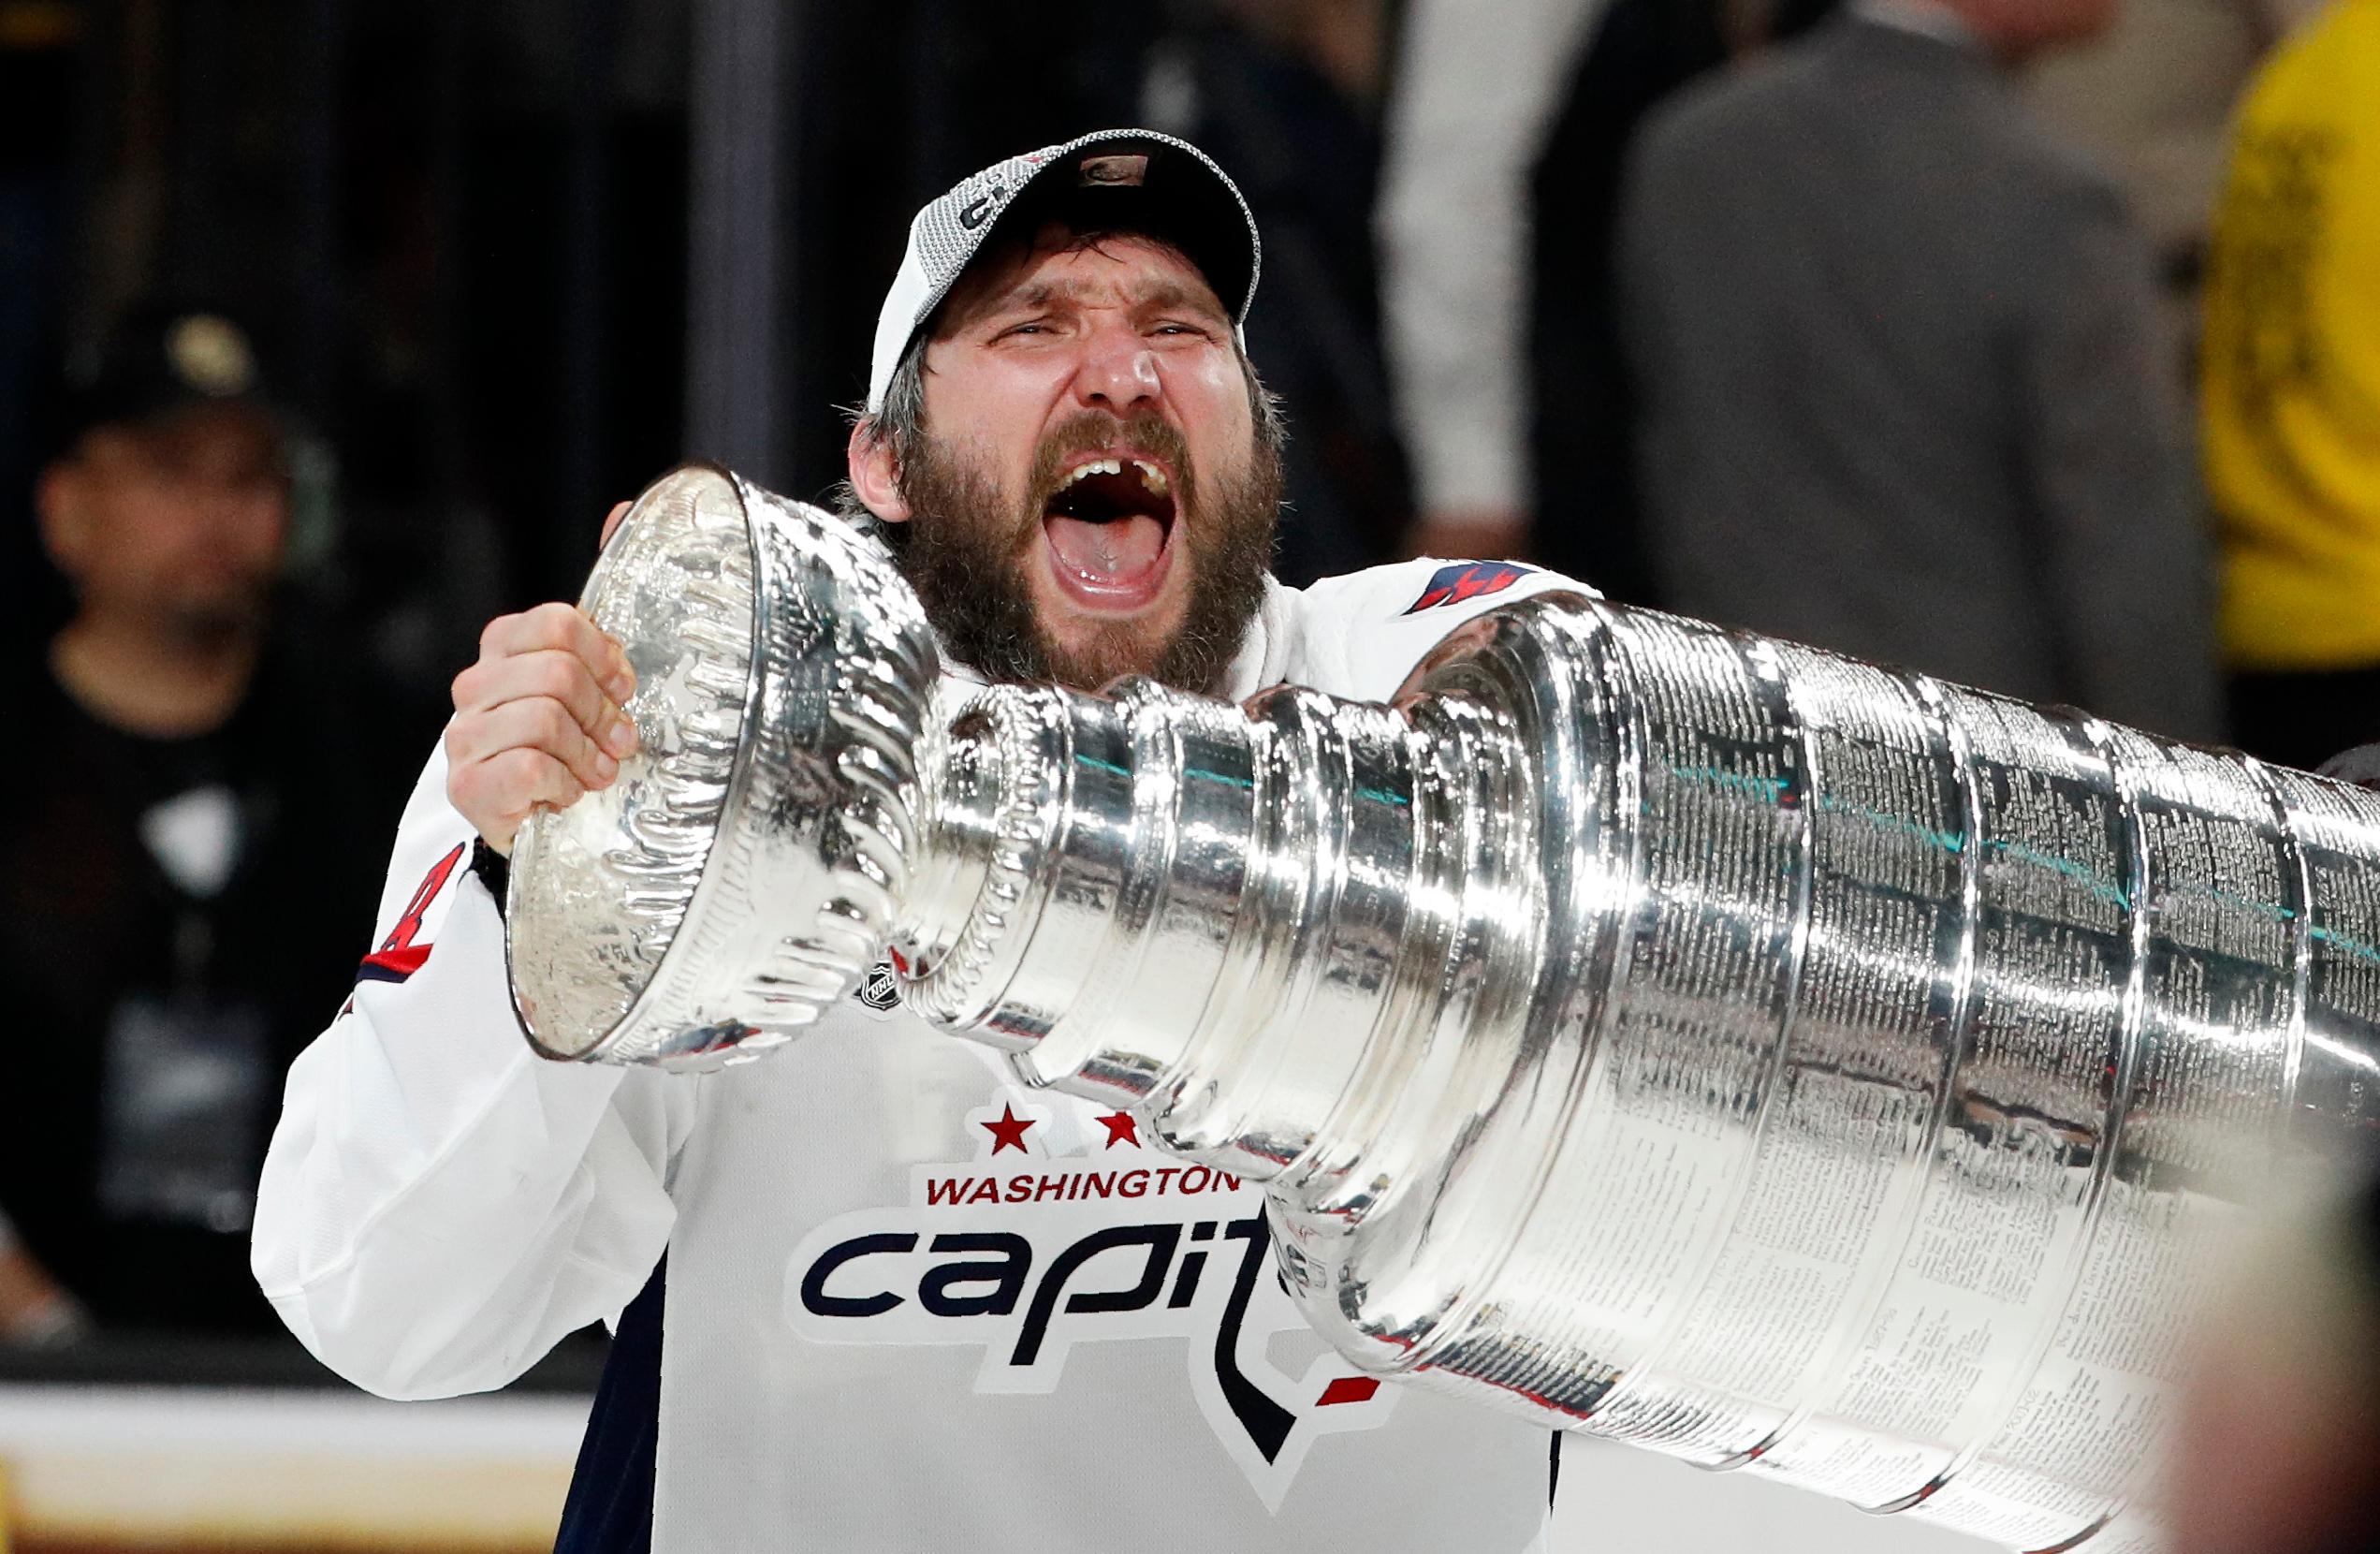 Capitals take their first Cup